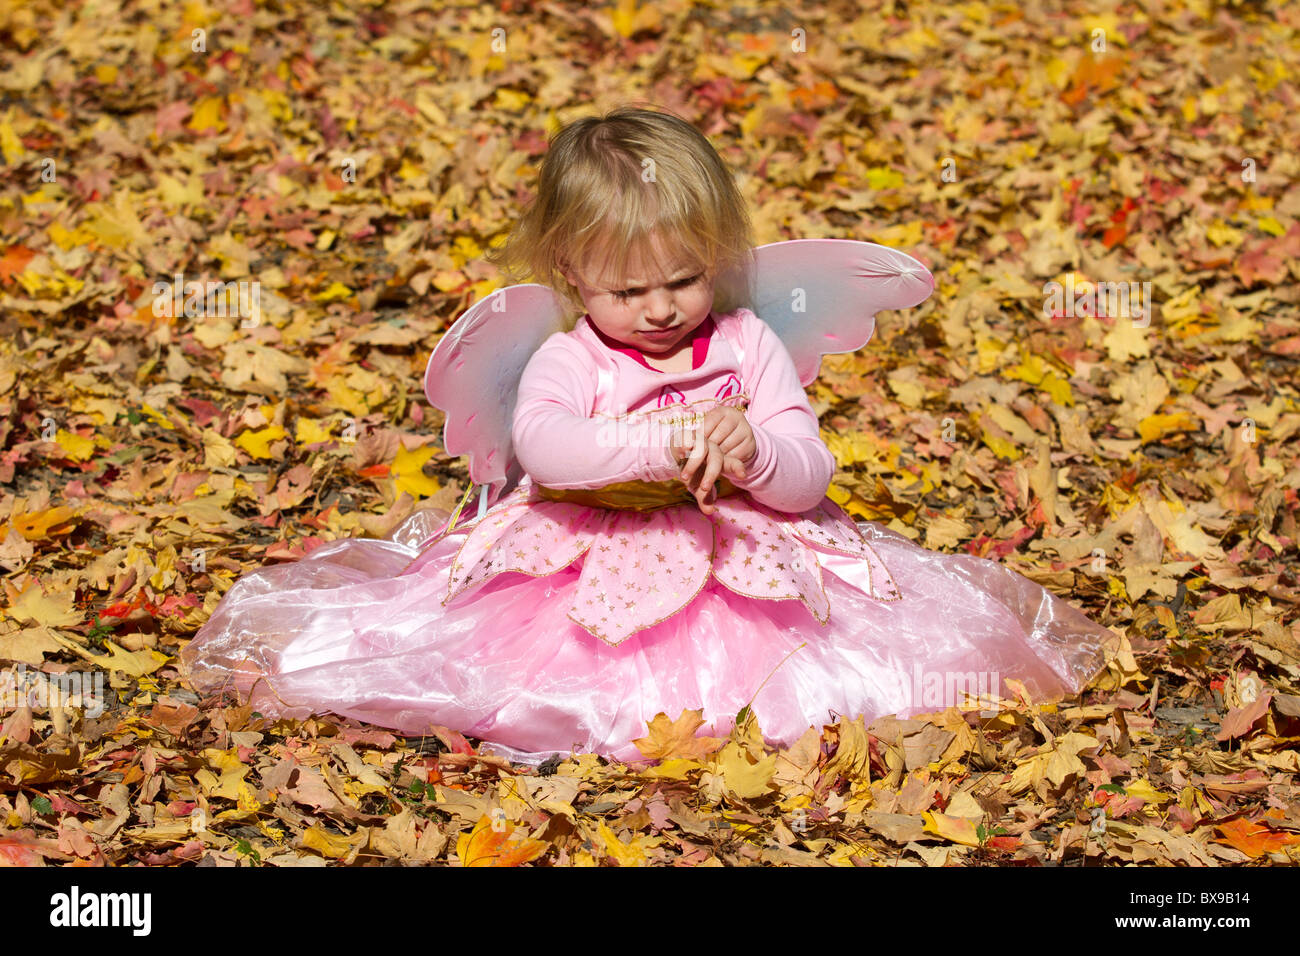 Dressed As A Fairy High Resolution Stock Photography and Images - Alamy